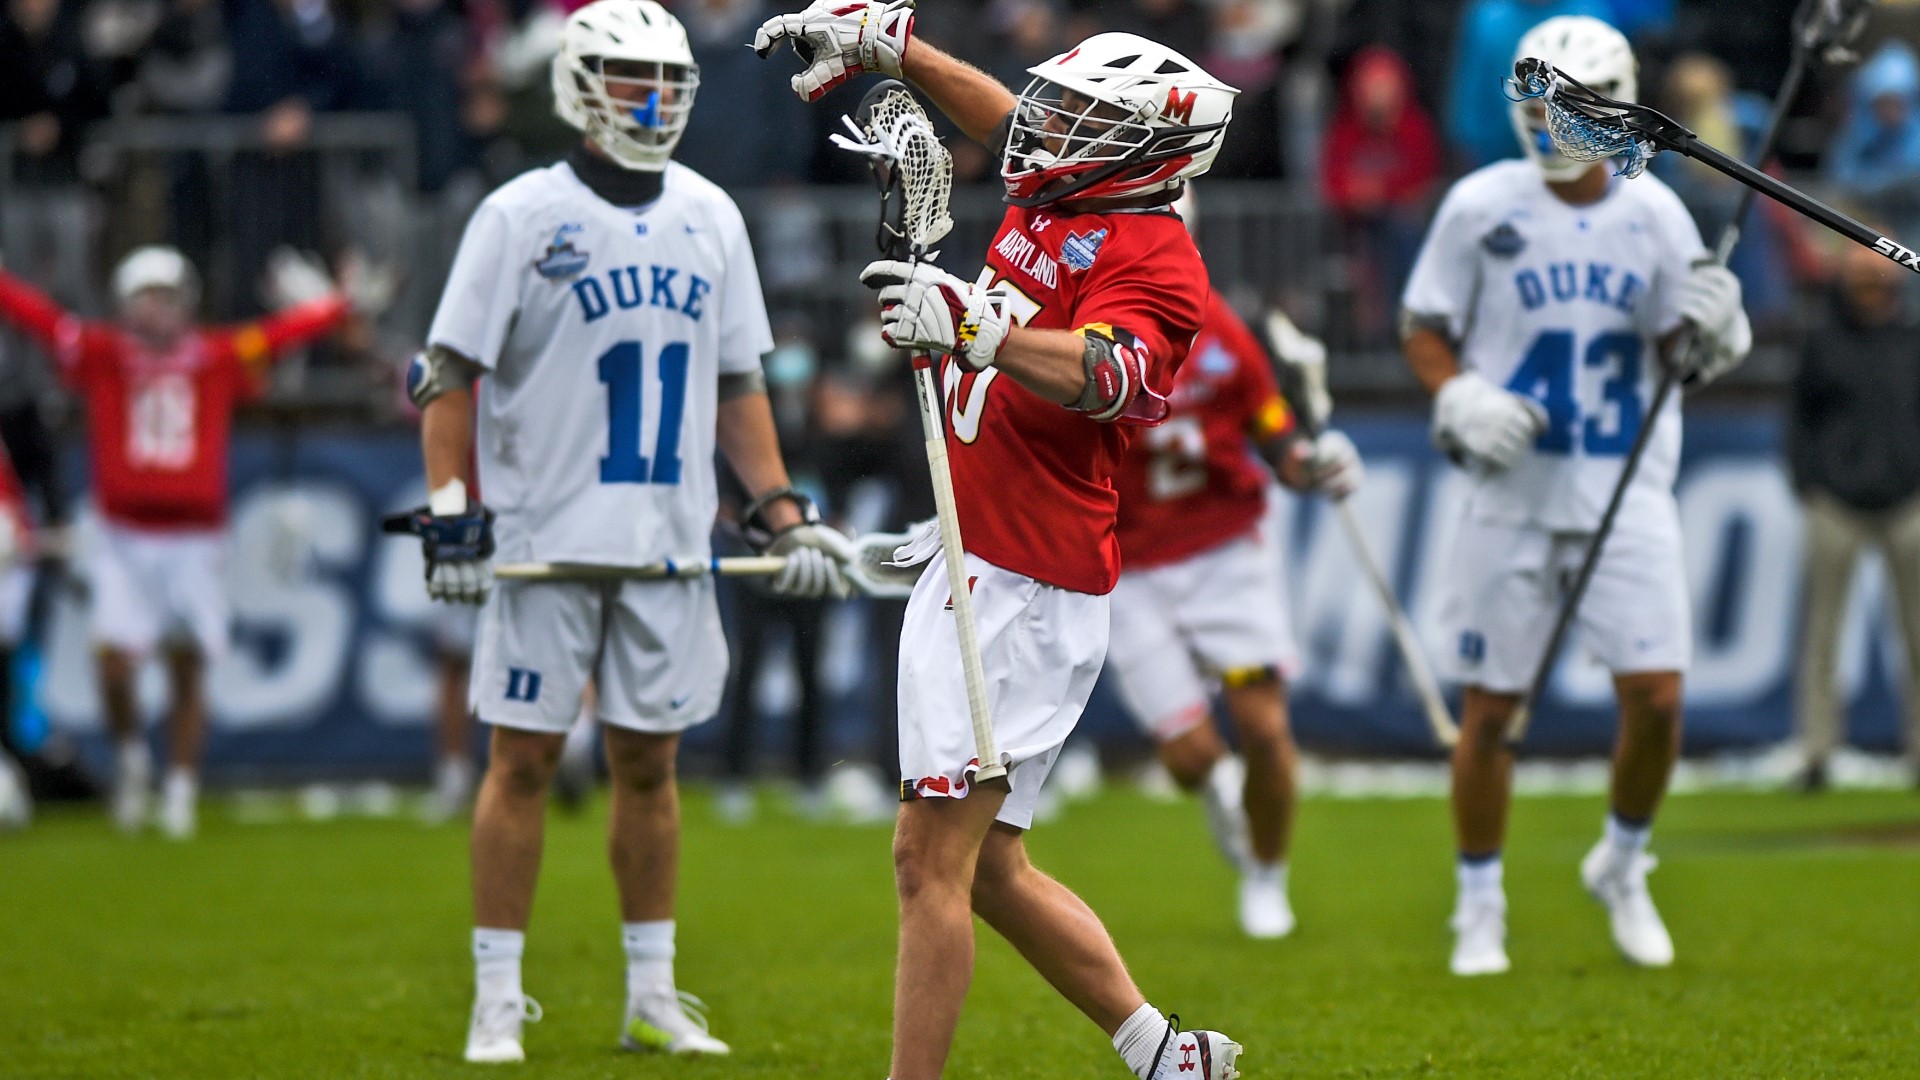 This old Atlantic Coast Conference lacrosse rivalry includes a slight edge for the Terps over the Cavs, 47-45 through 92 matchups dating back to 1926.